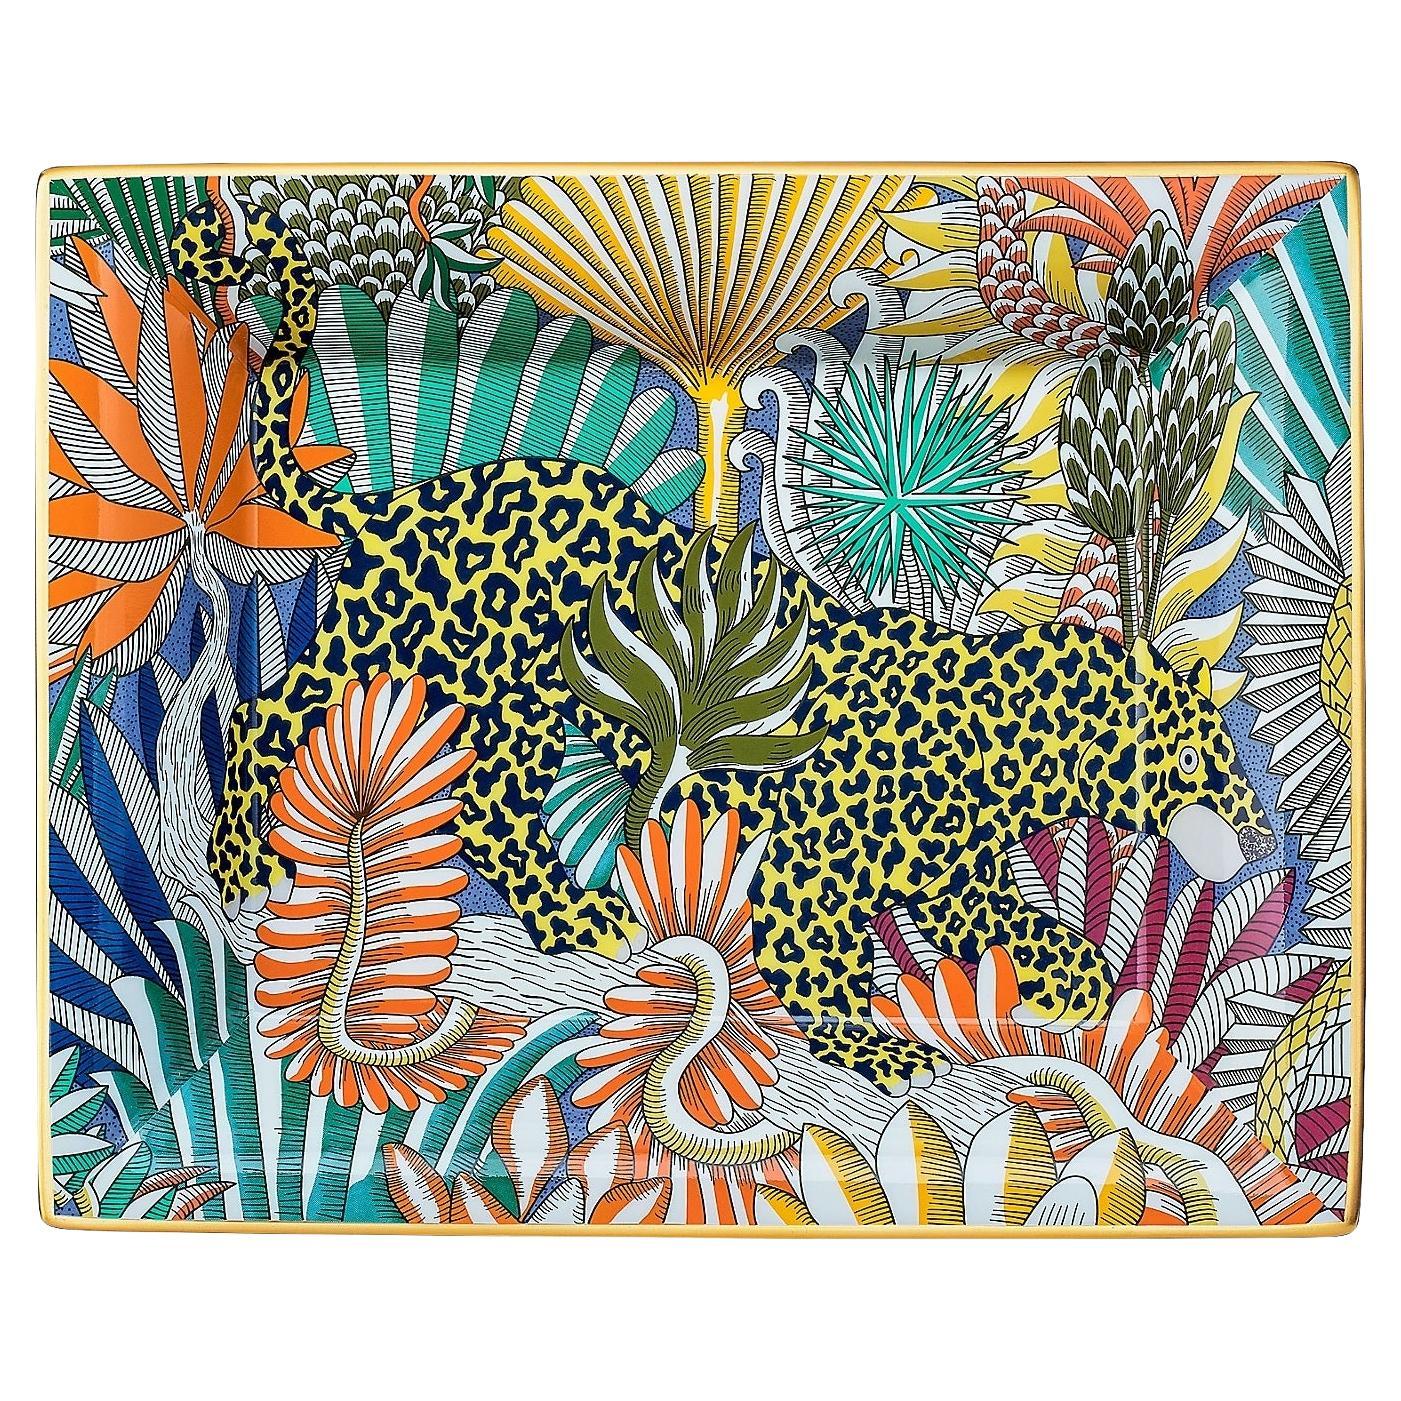 Hermes Végétal Animaux Camoufles change tray